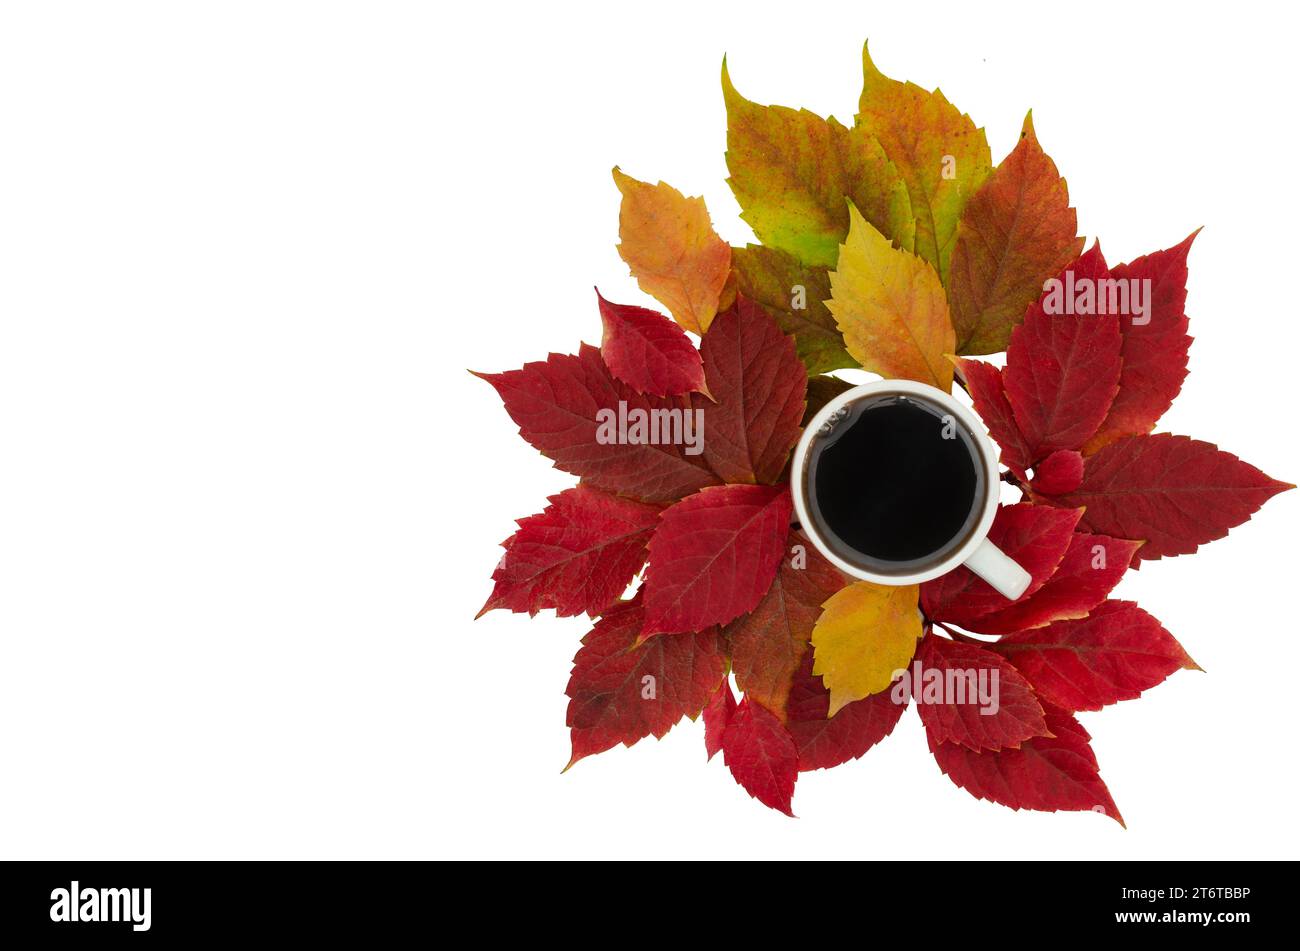 The cup stands on a white background, leaves are scattered around it. Leaves of different colors: yellow, orange, red. They look dry and crispy. The c Stock Photo